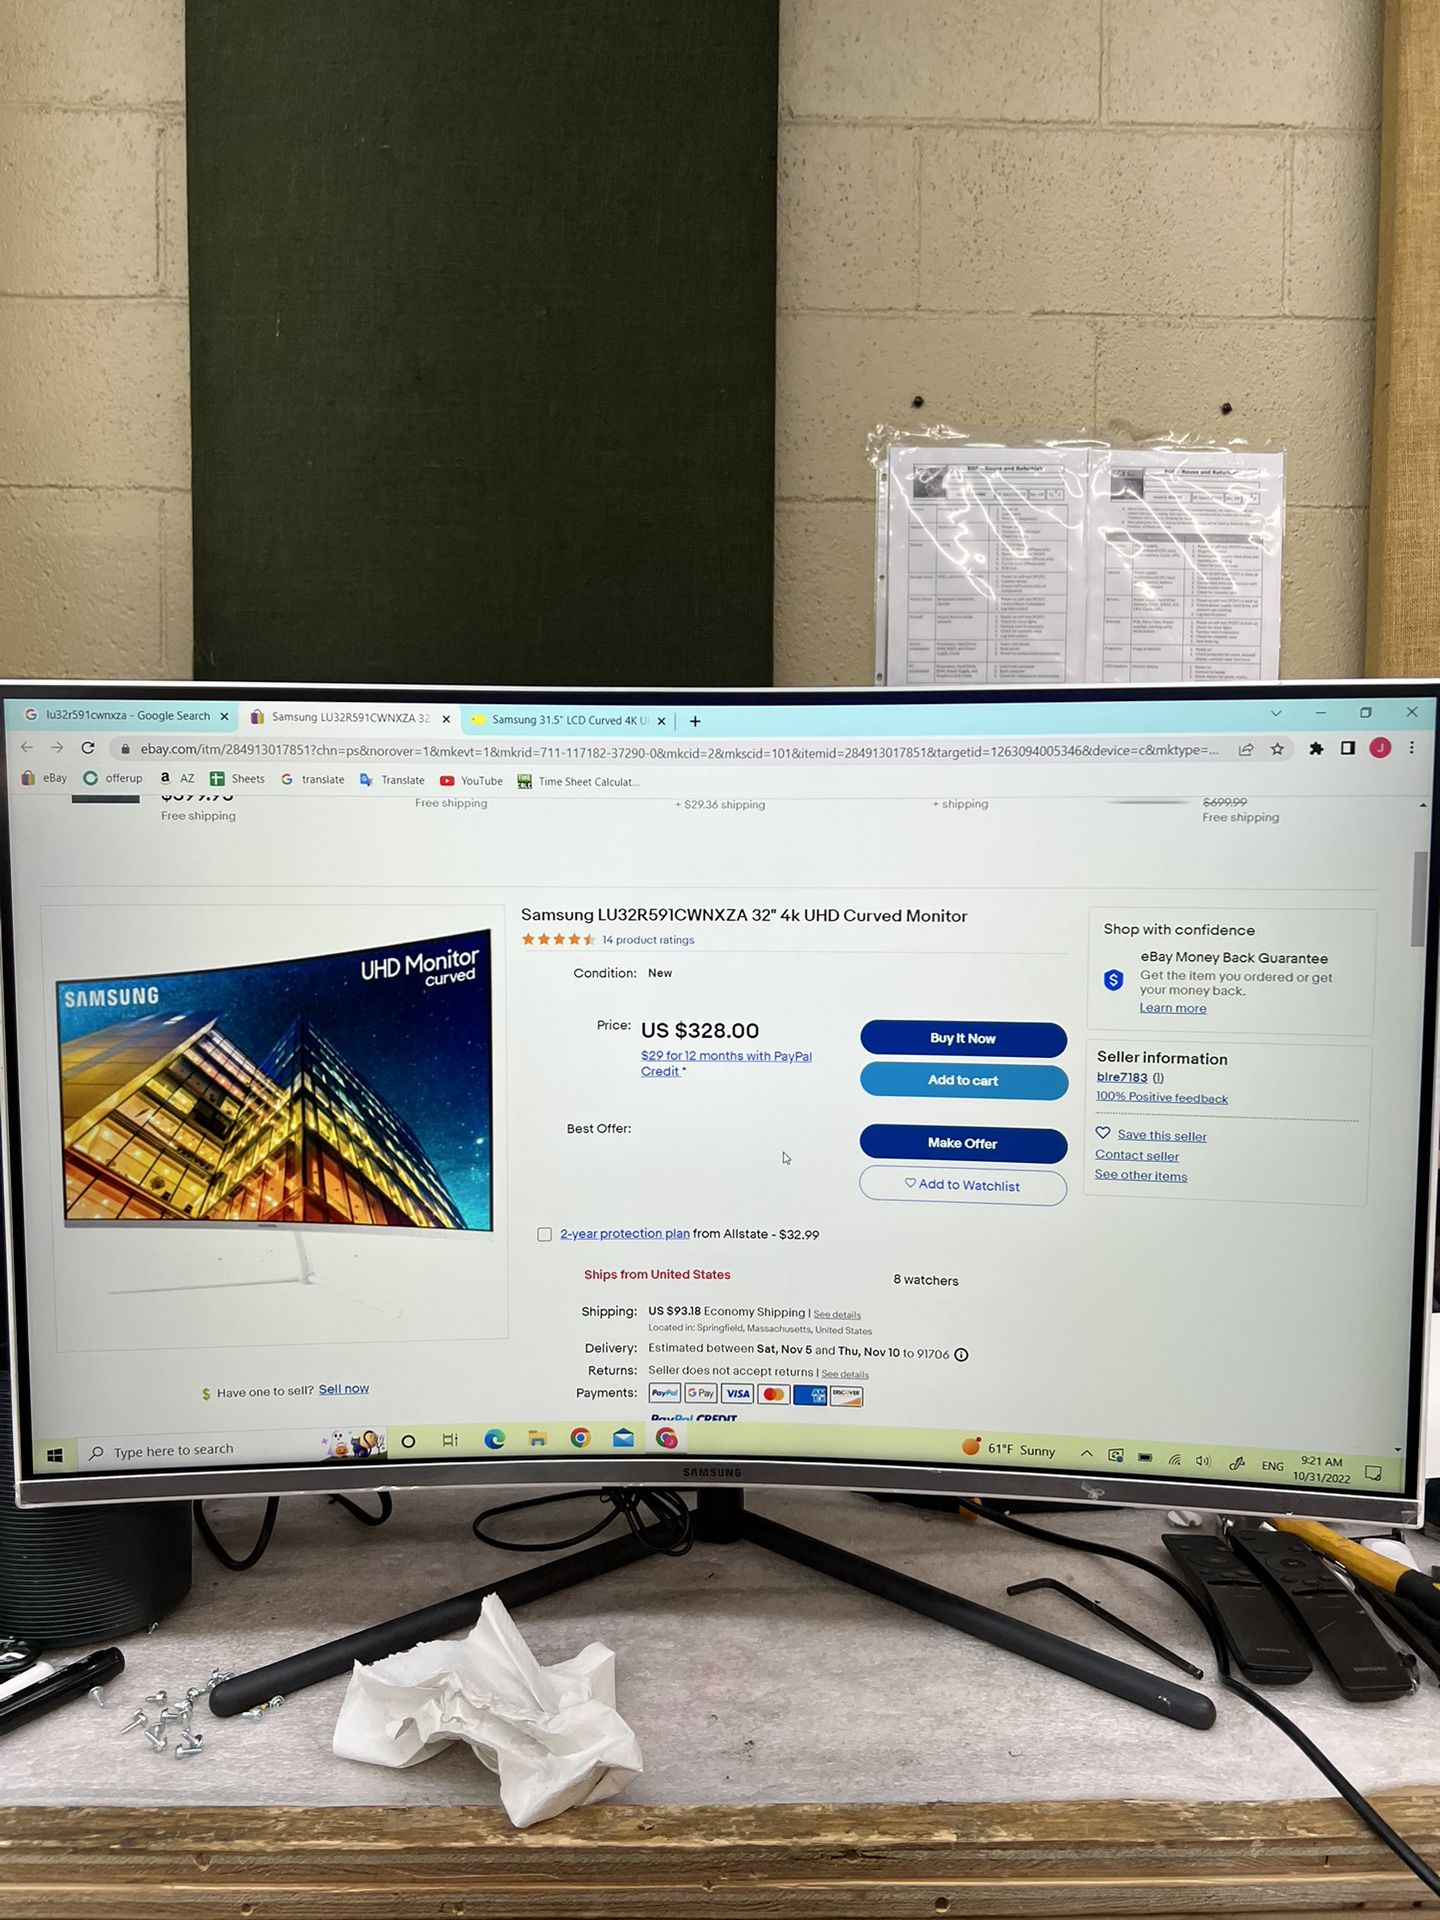 SAMSUNG UR59 Series 32-Inch 4K UHD (3840x2160) Monitor, Curved, HDMI, Display Port(LU32R591CWNXZA) (Paint On The Back And Some Of Them Has Scratches)